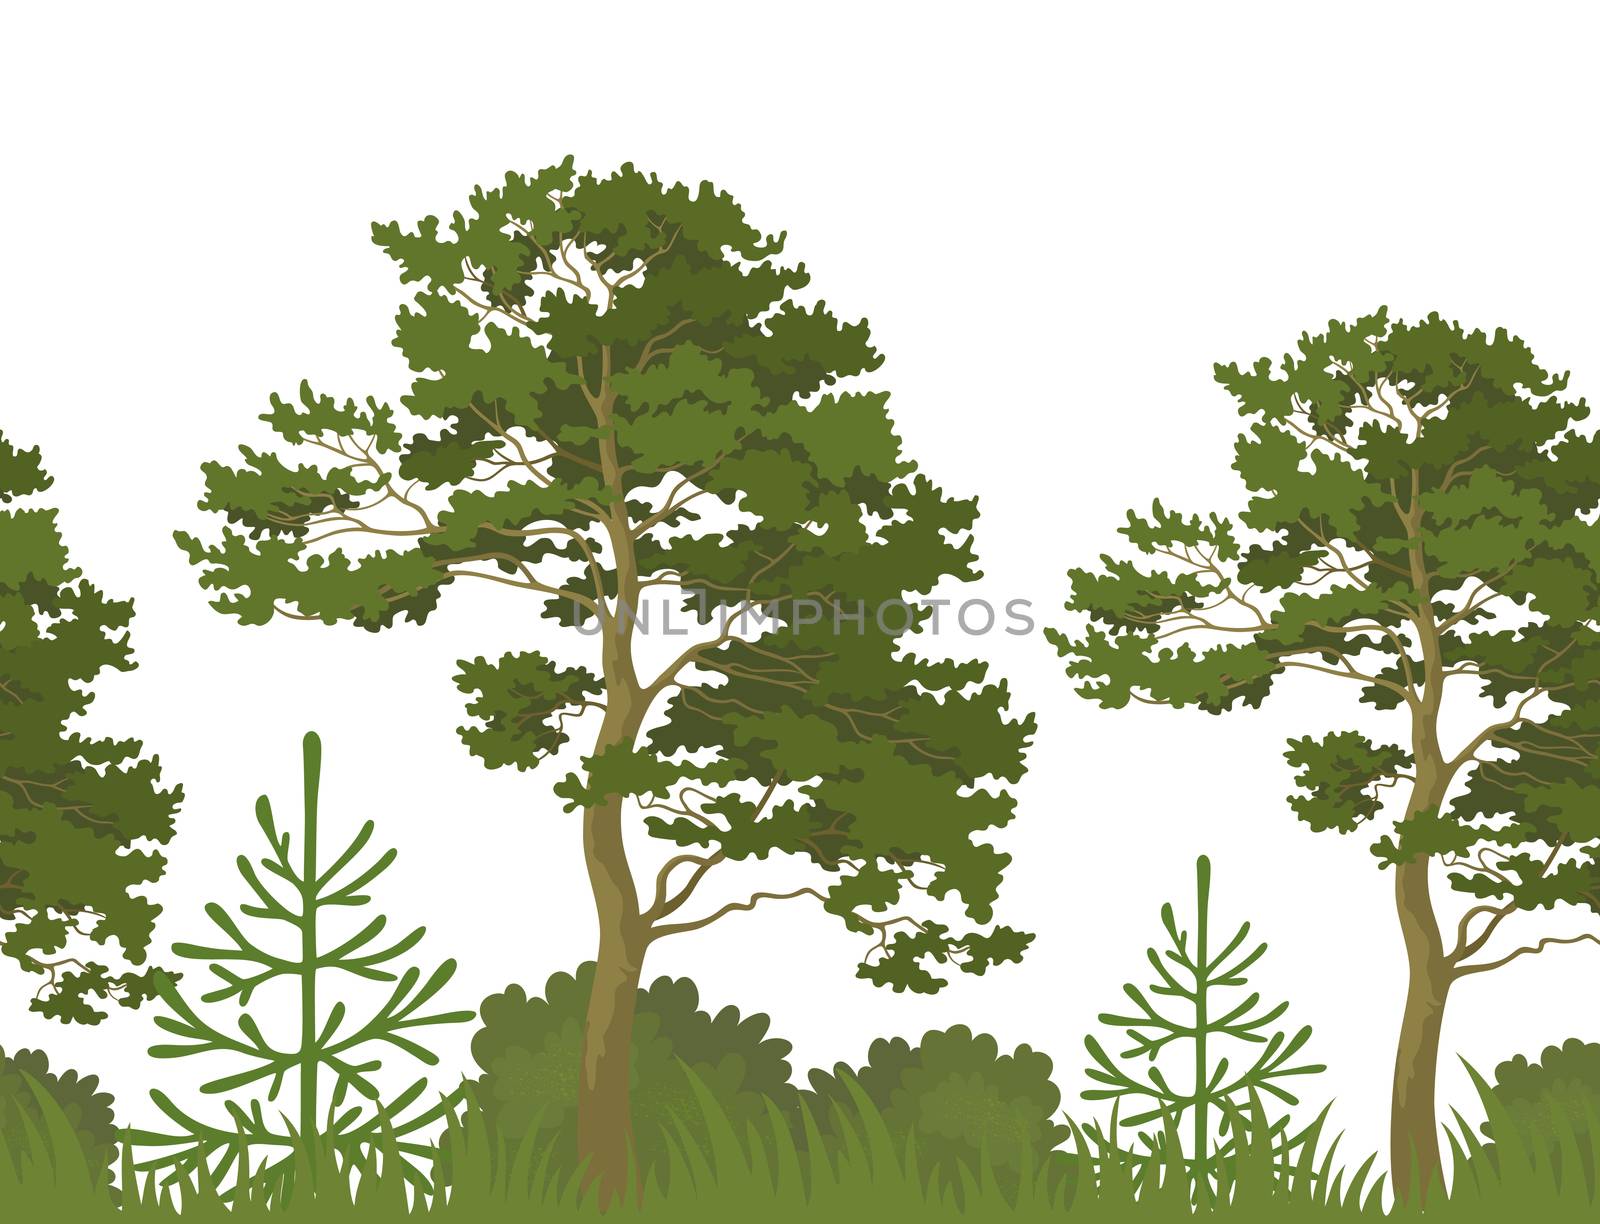 Seamless, green summer forest with pine, fir tree, grass and bush isolated on white background.